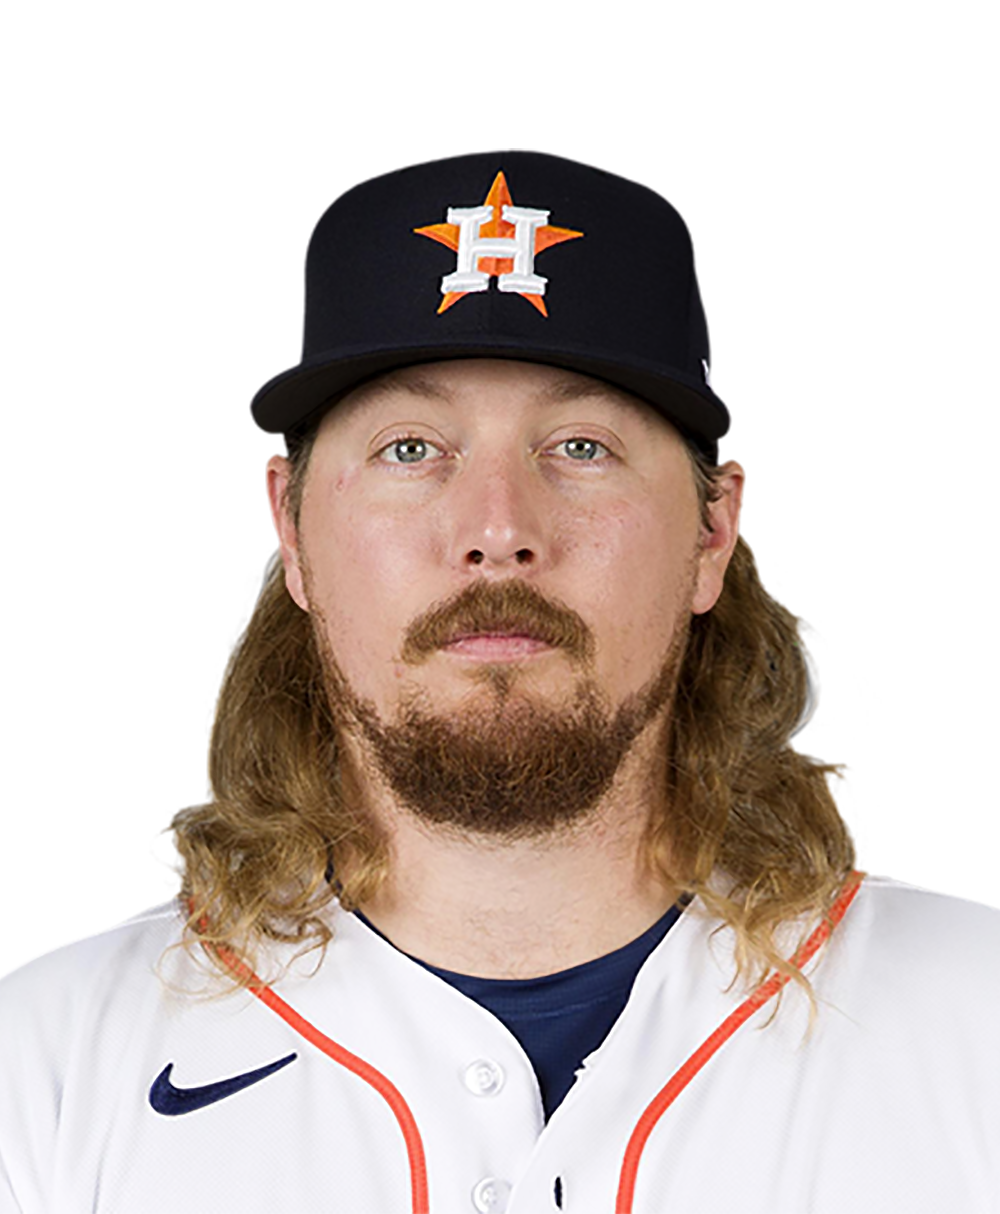 Astros player ryne stanek with unique hairstyle